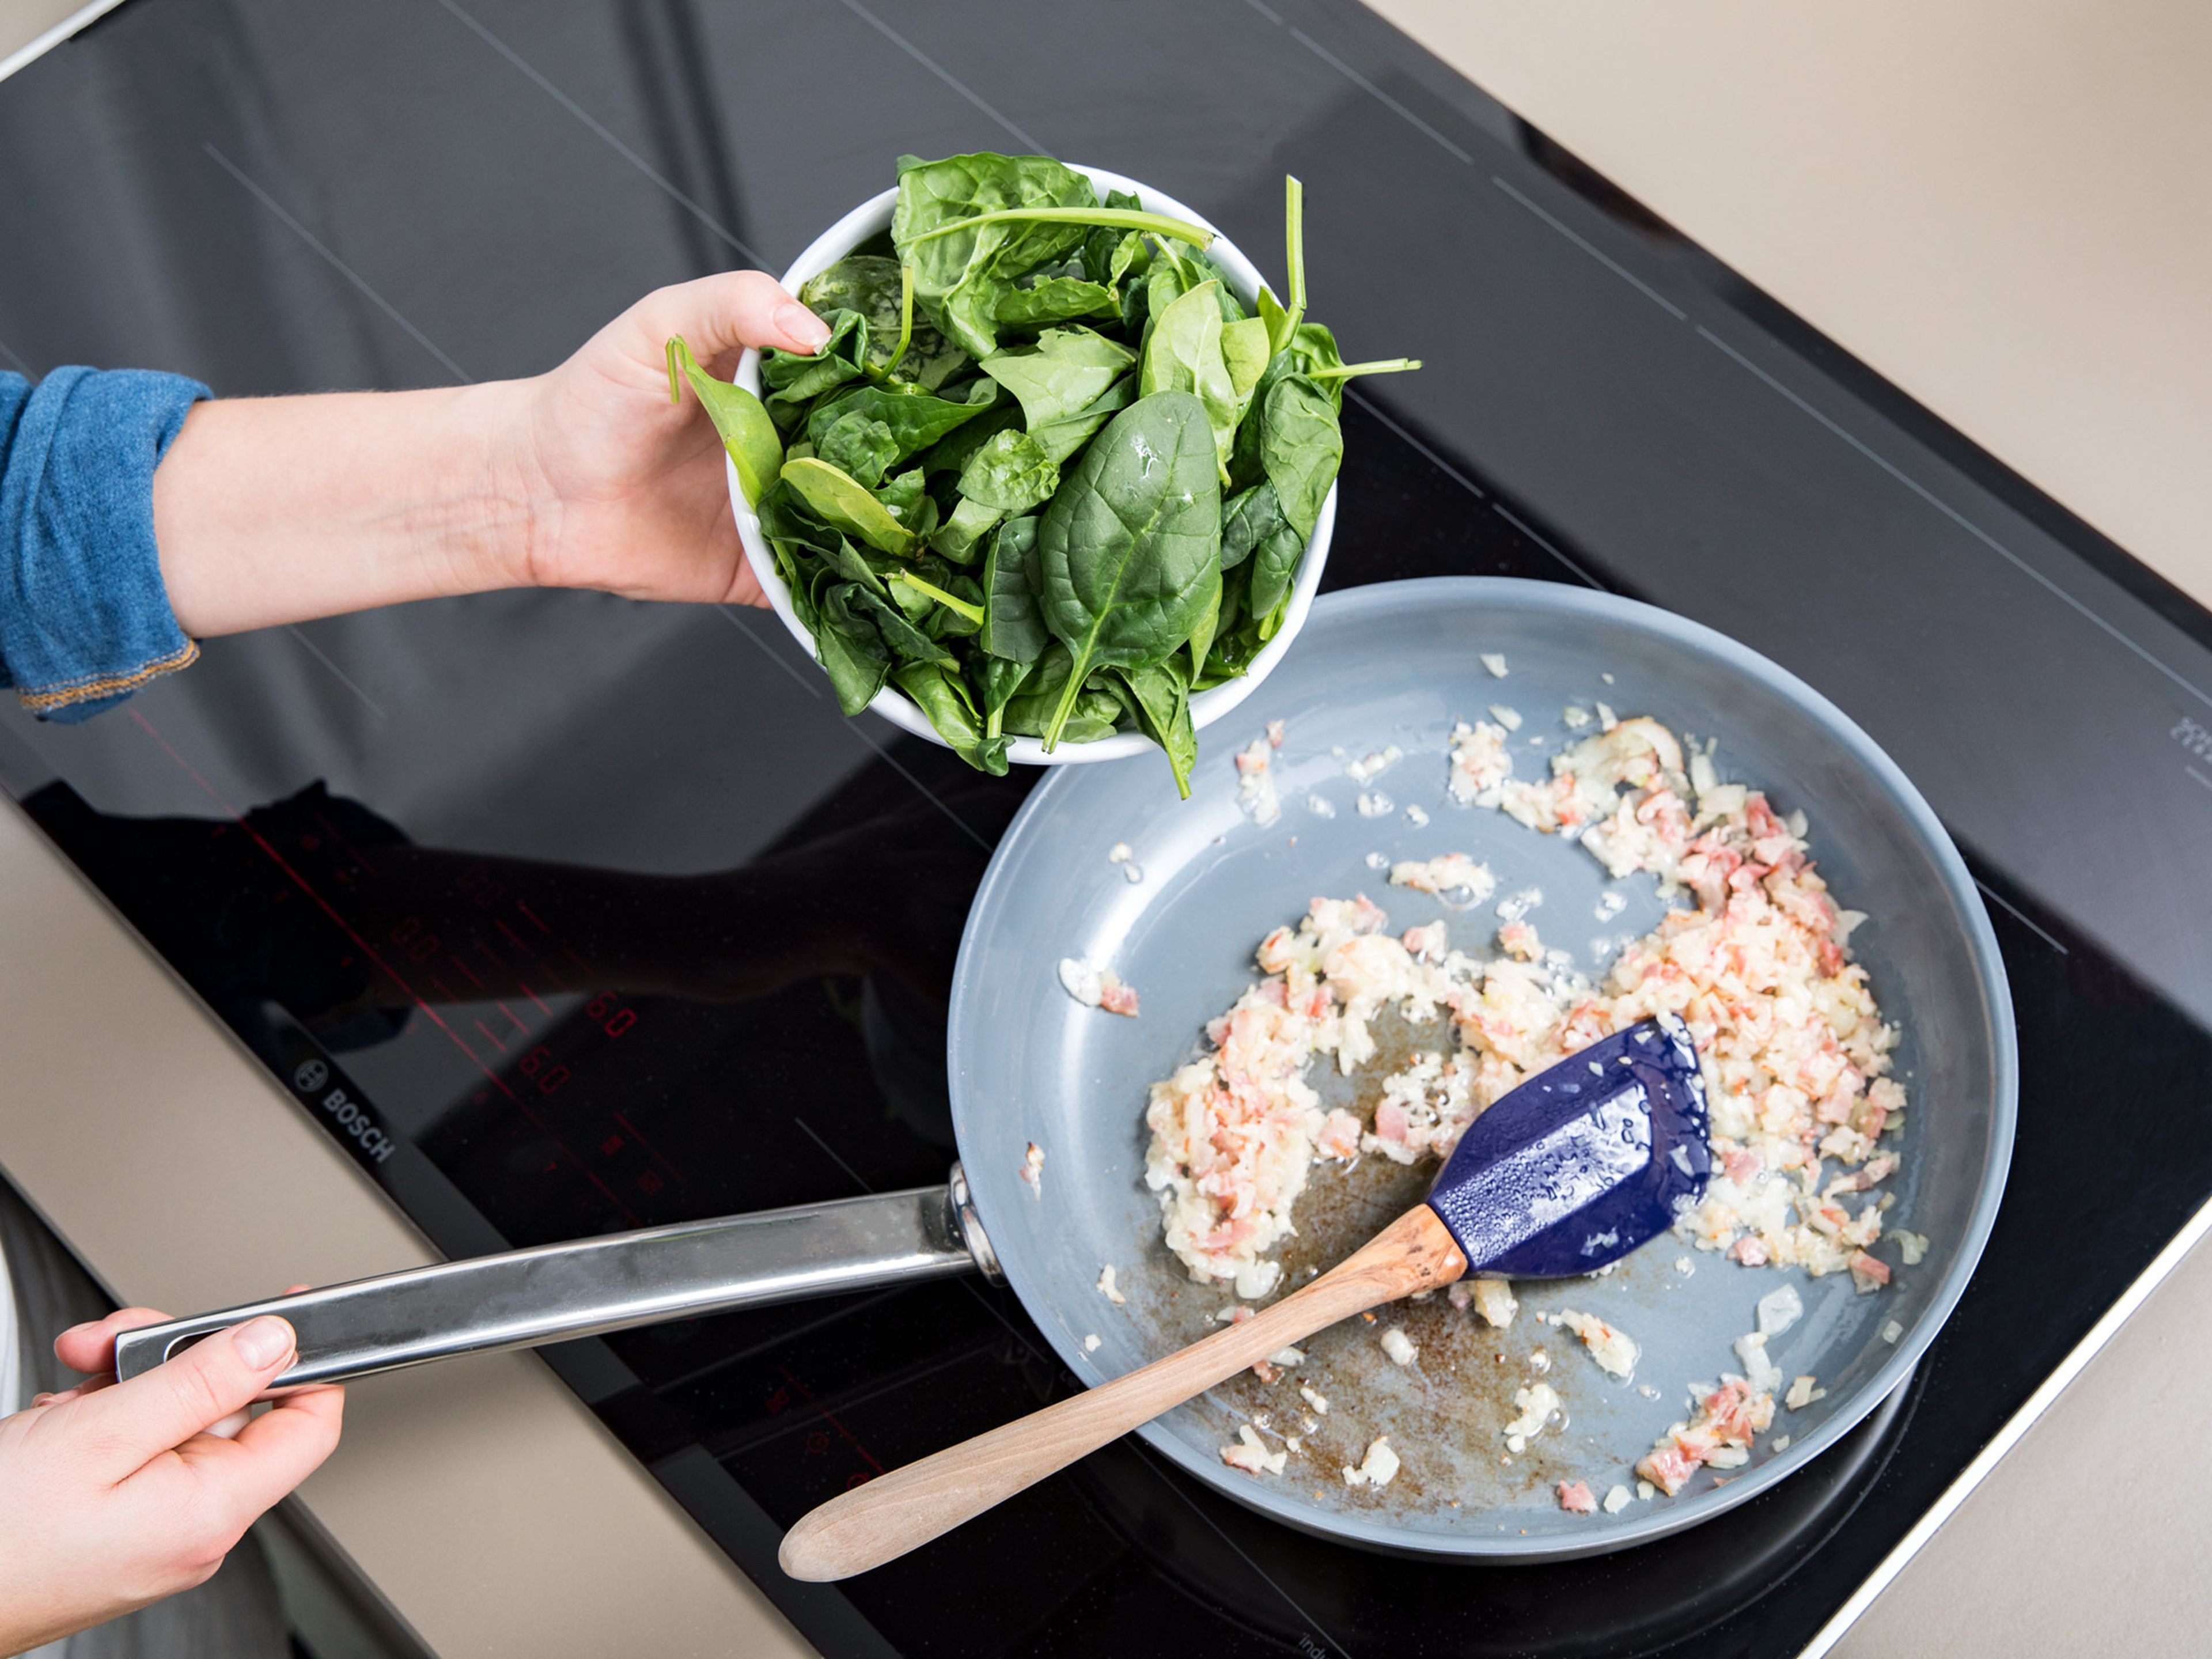 Heat sunflower oil in a large frying pan. Add onion, bacon, and garlic. Once onion is translucent, add spinach, season with nutmeg, and sauté until spinach is wilted.